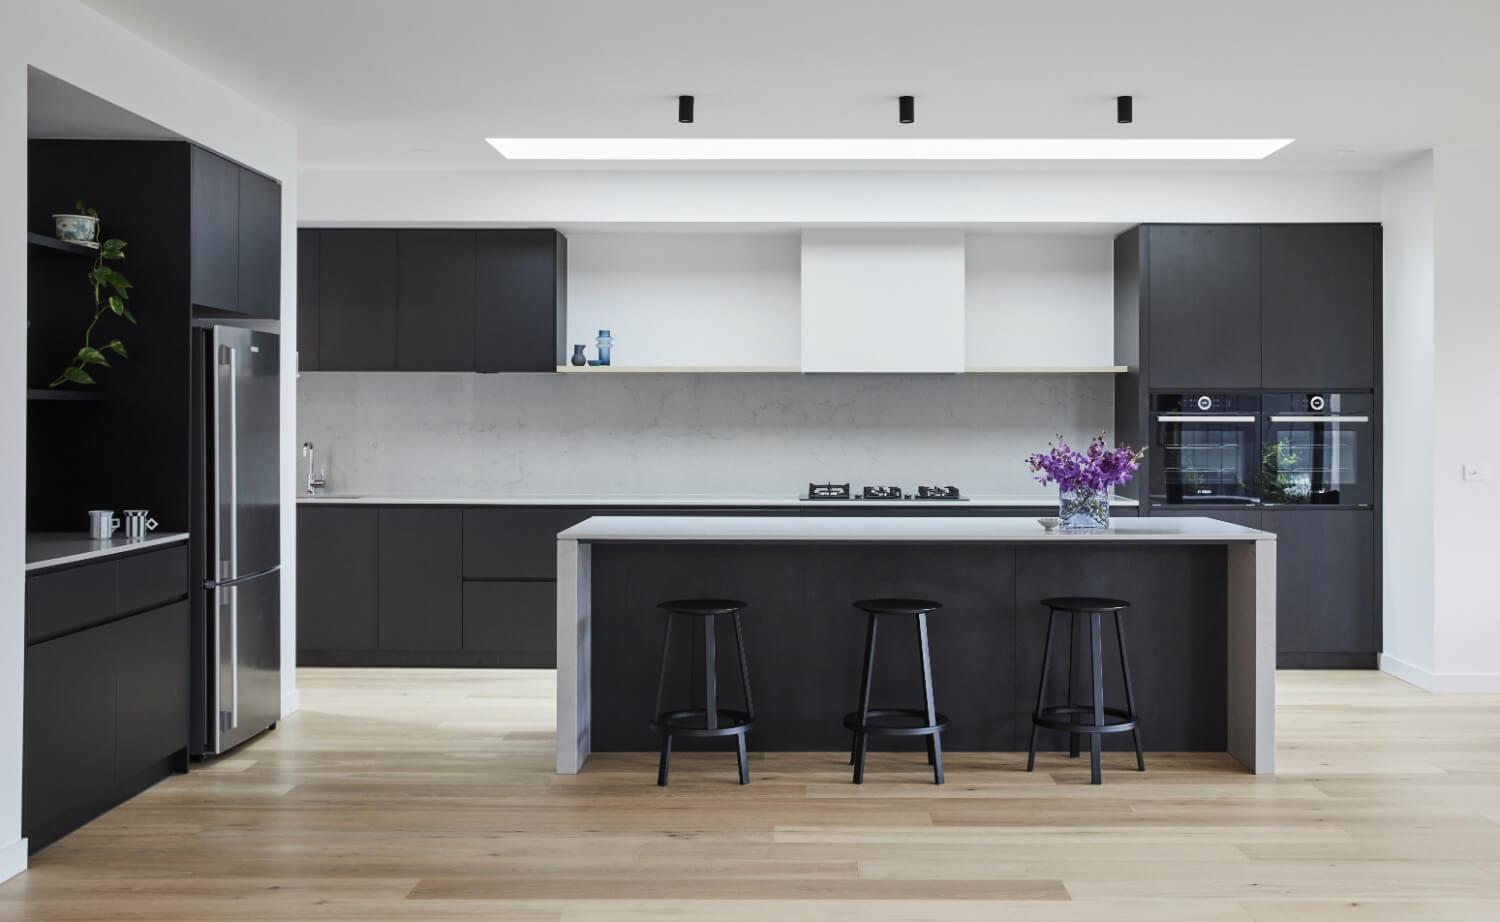 Black Cabinetry Contrasts Against Natural White Benchtops And Rangehood